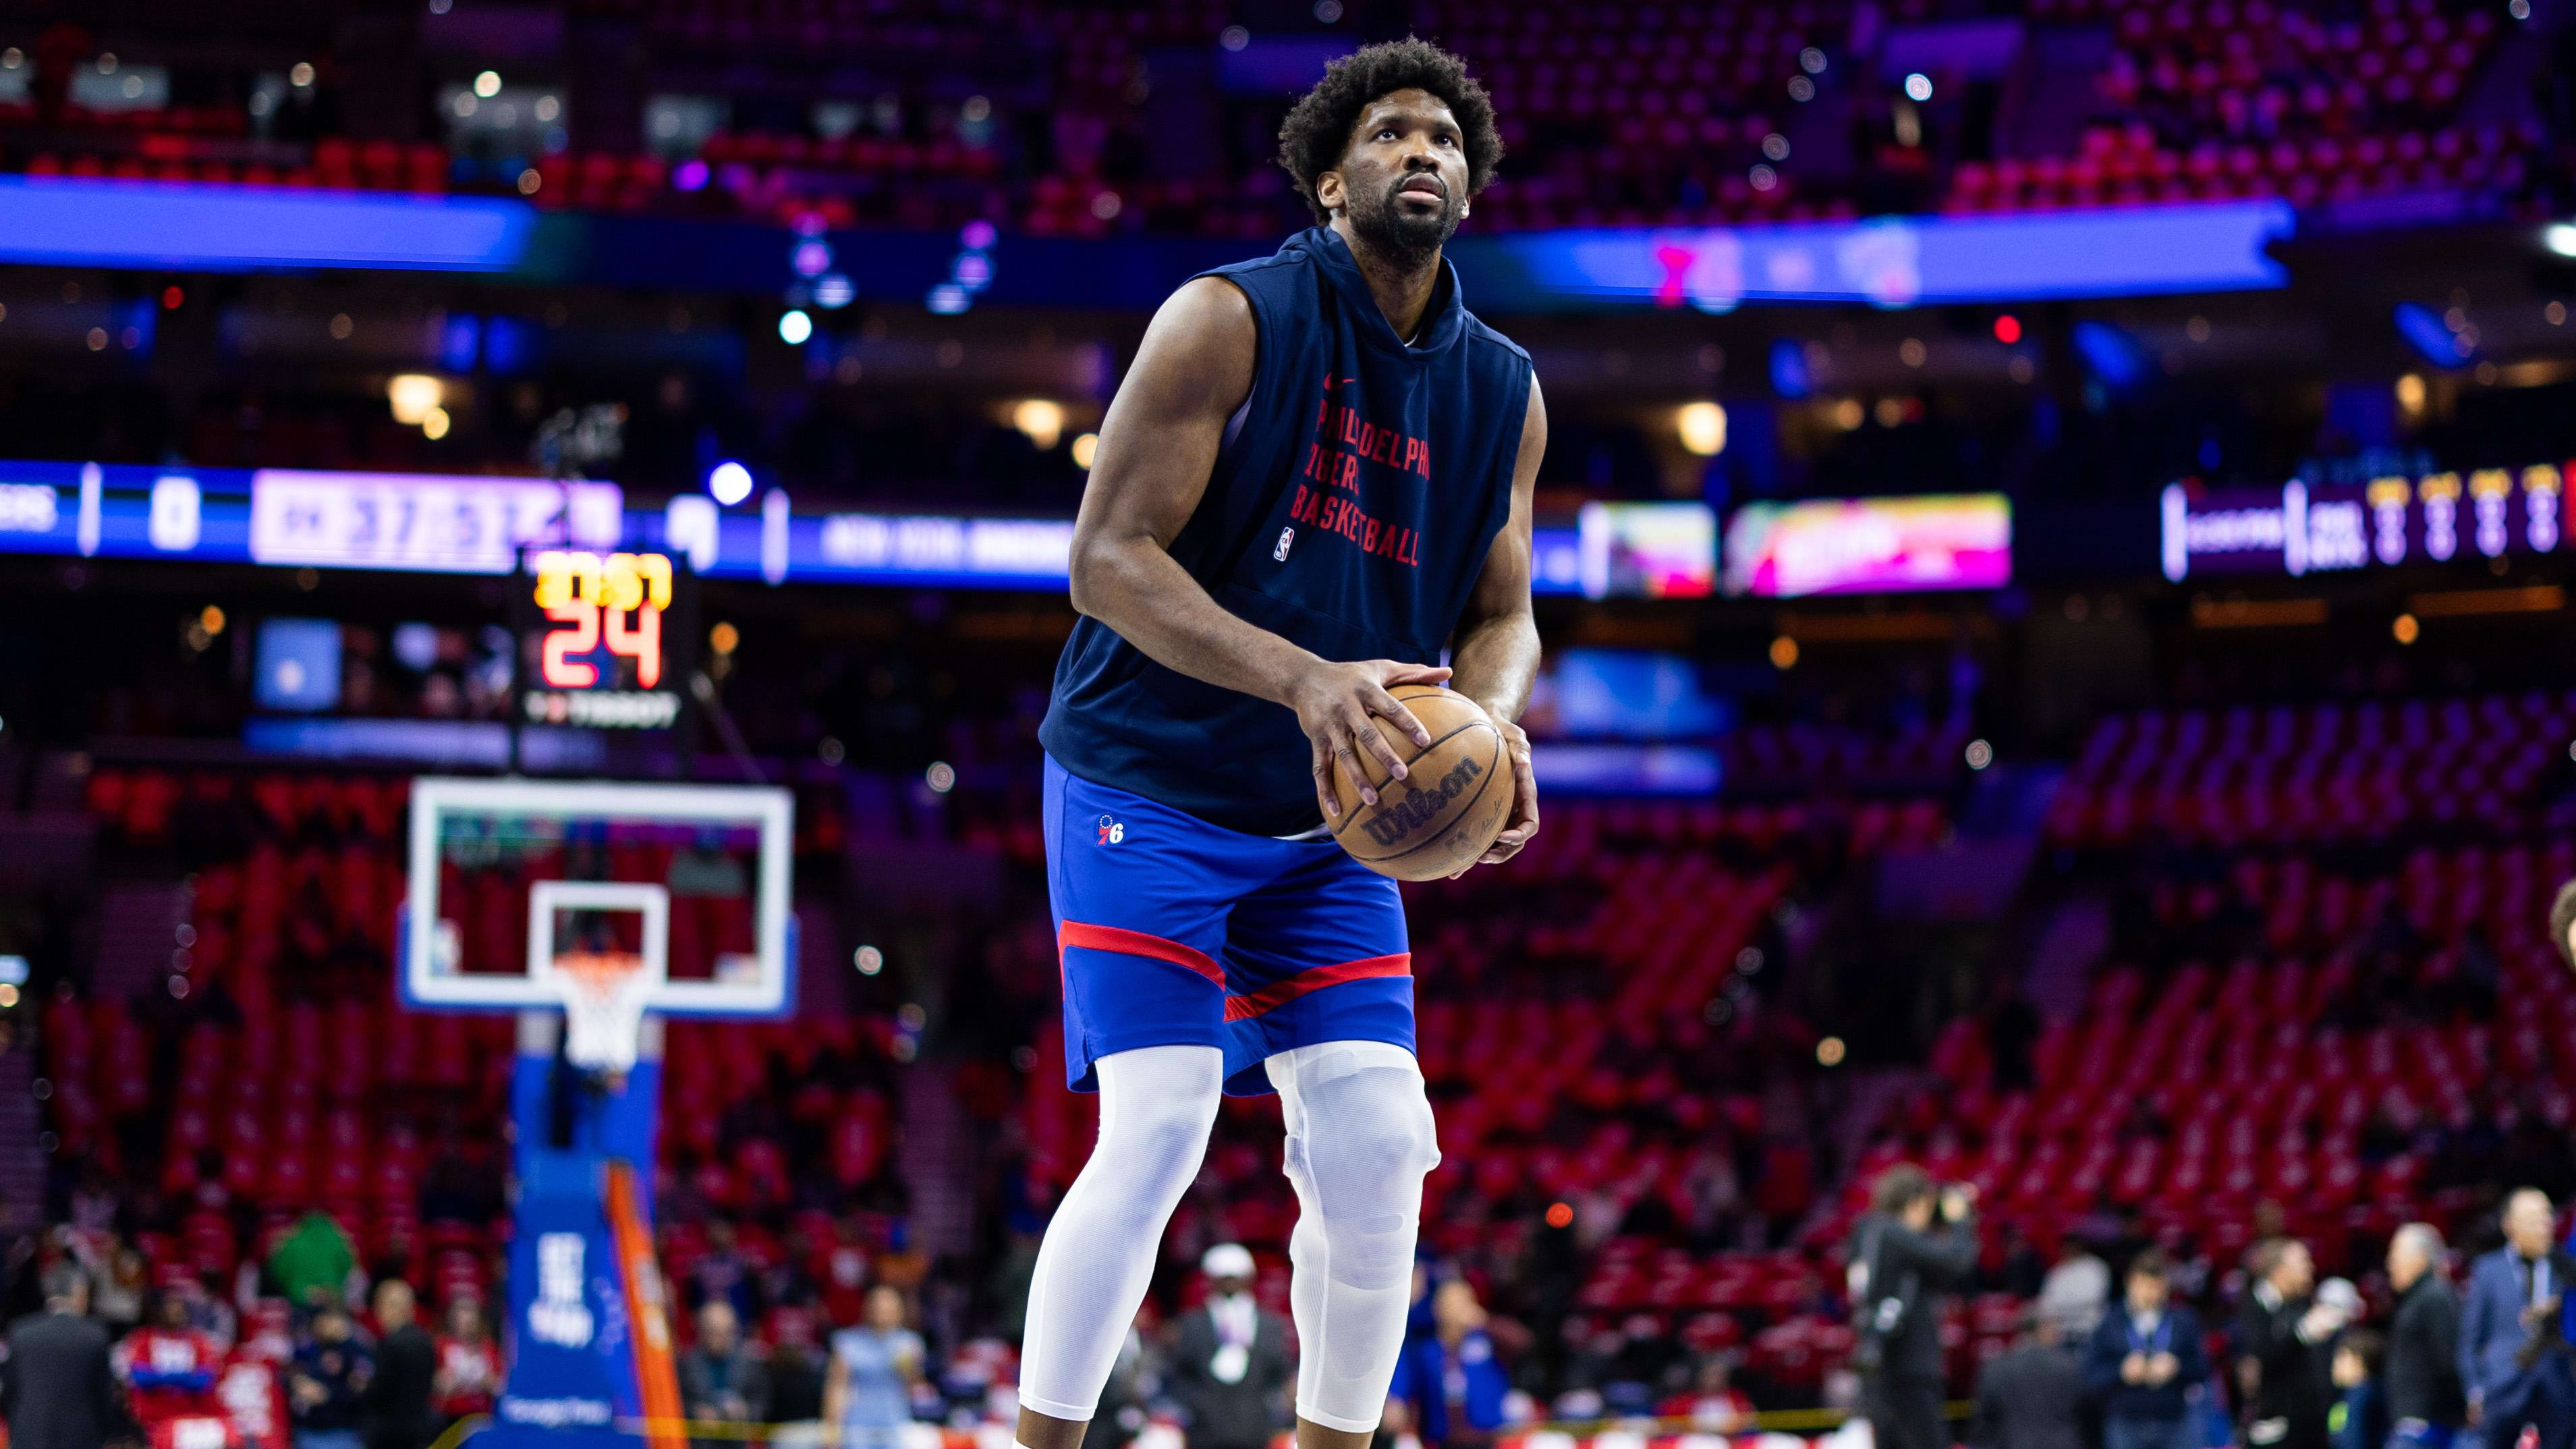 From Knee Injury Setback to Impressive Postseason: Joel Embiid’s Bell’s Palsy Diagnosis Keeps Fans Guessing